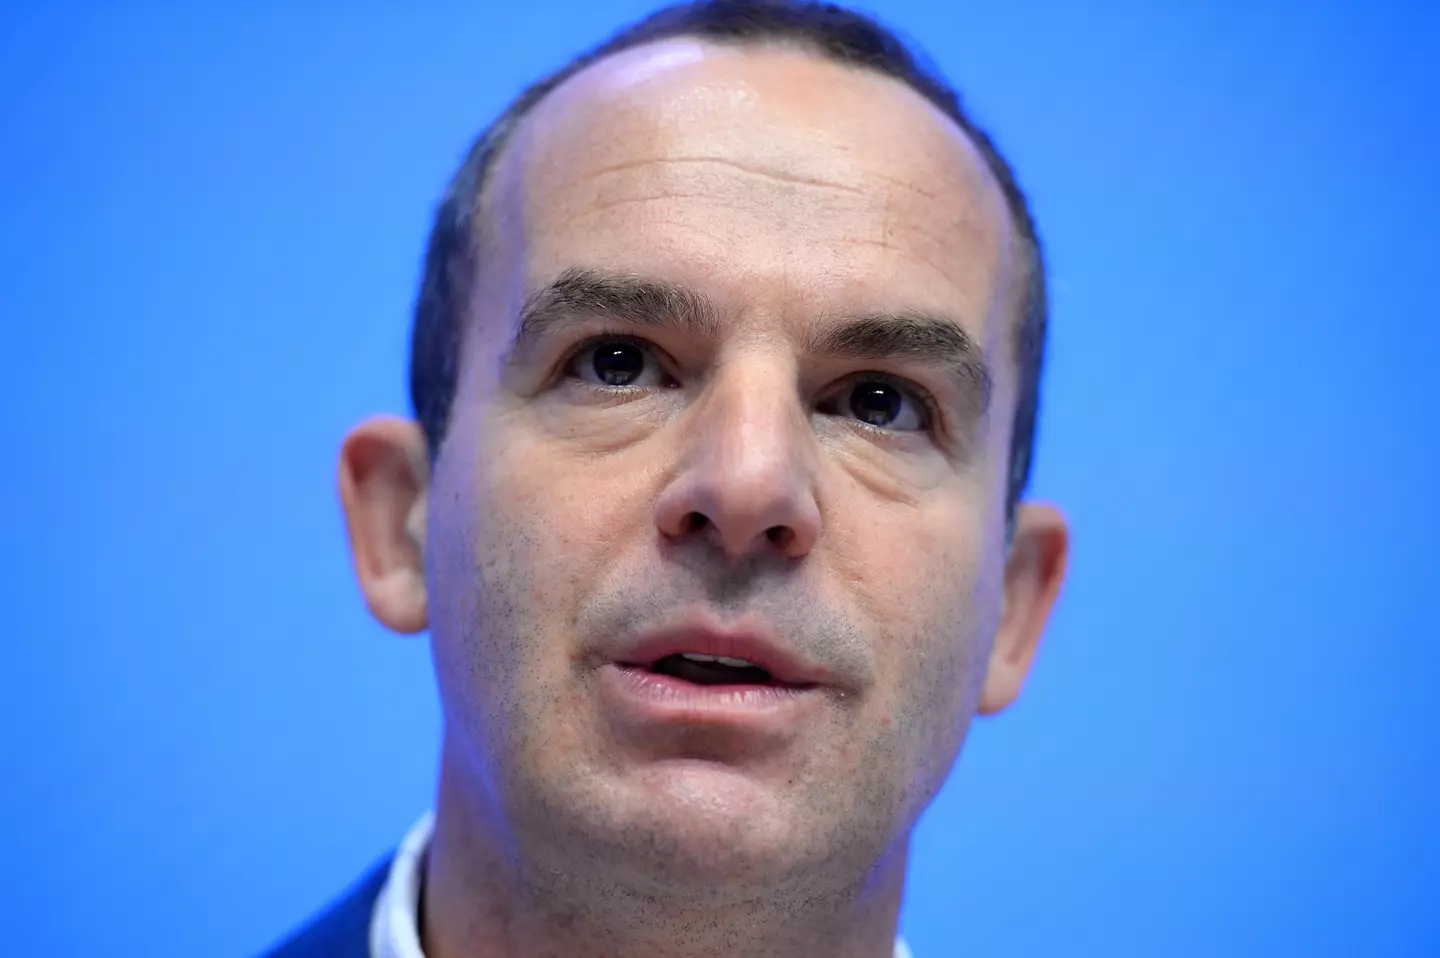 Martin Lewis believes we're heading for a 'poll tax moment'.